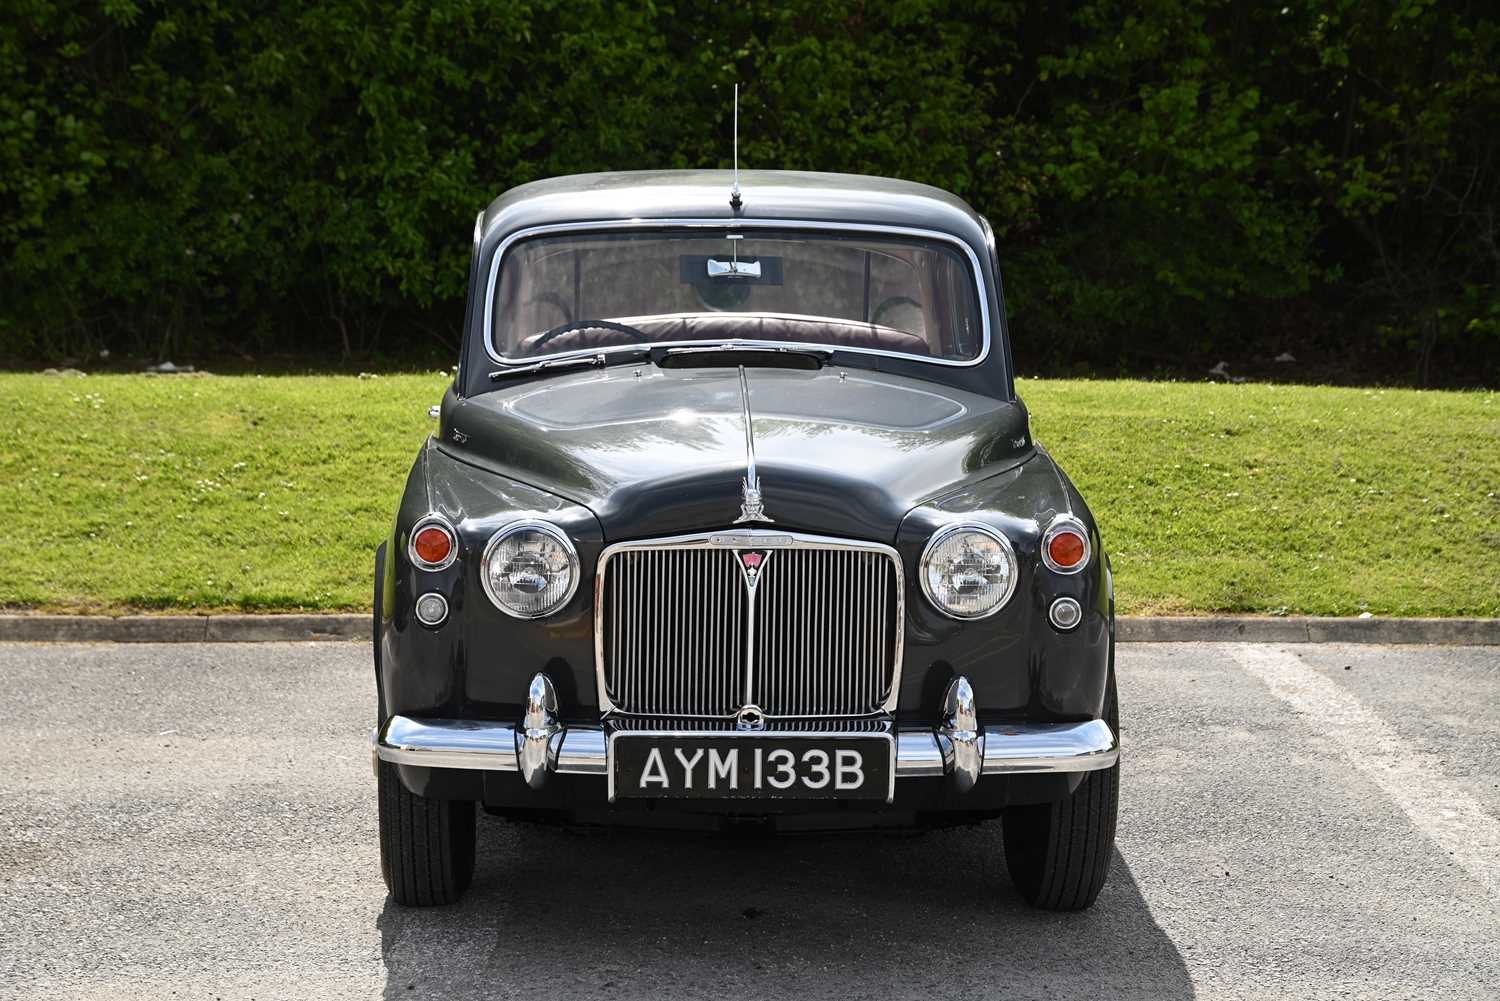 Lot 49 1964 Rover P4 110 Saloon